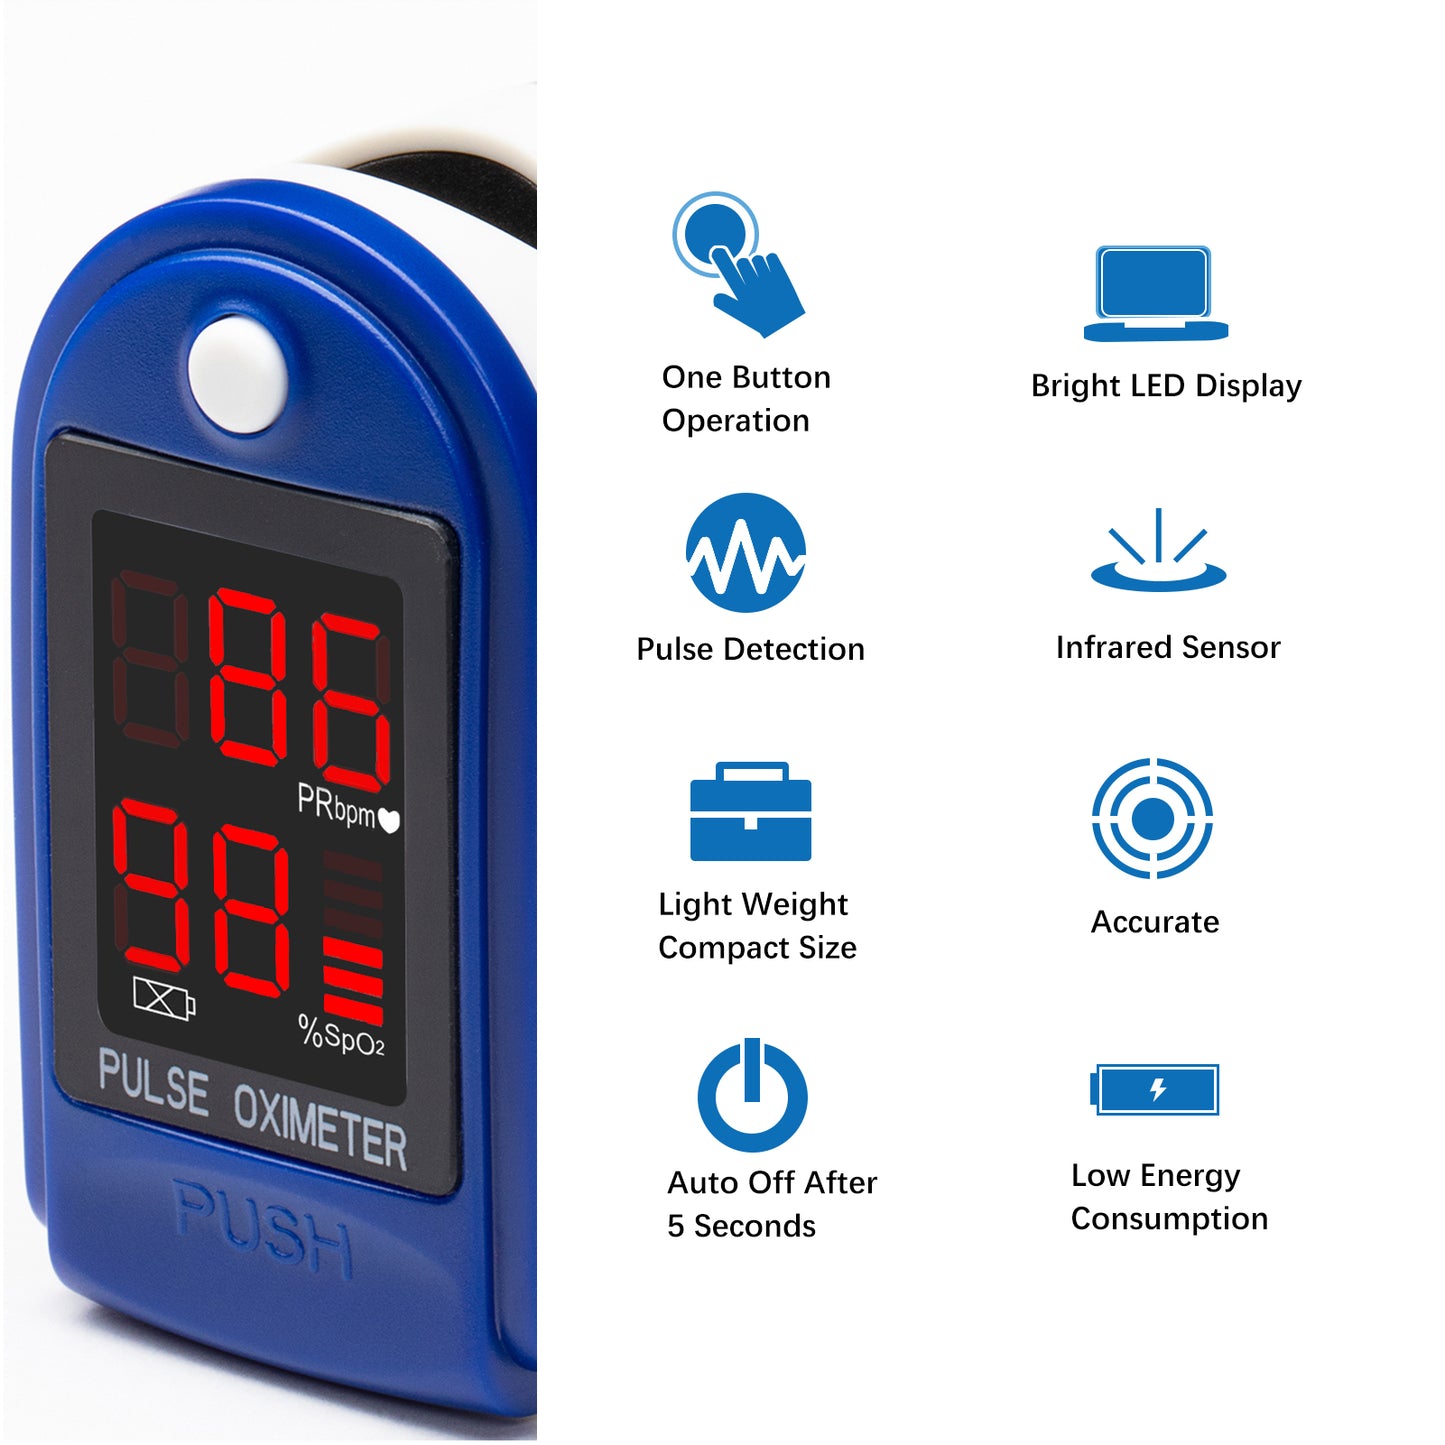 Finger Pulse Oximeter Clinical Guard 50DL Image 4 - Features